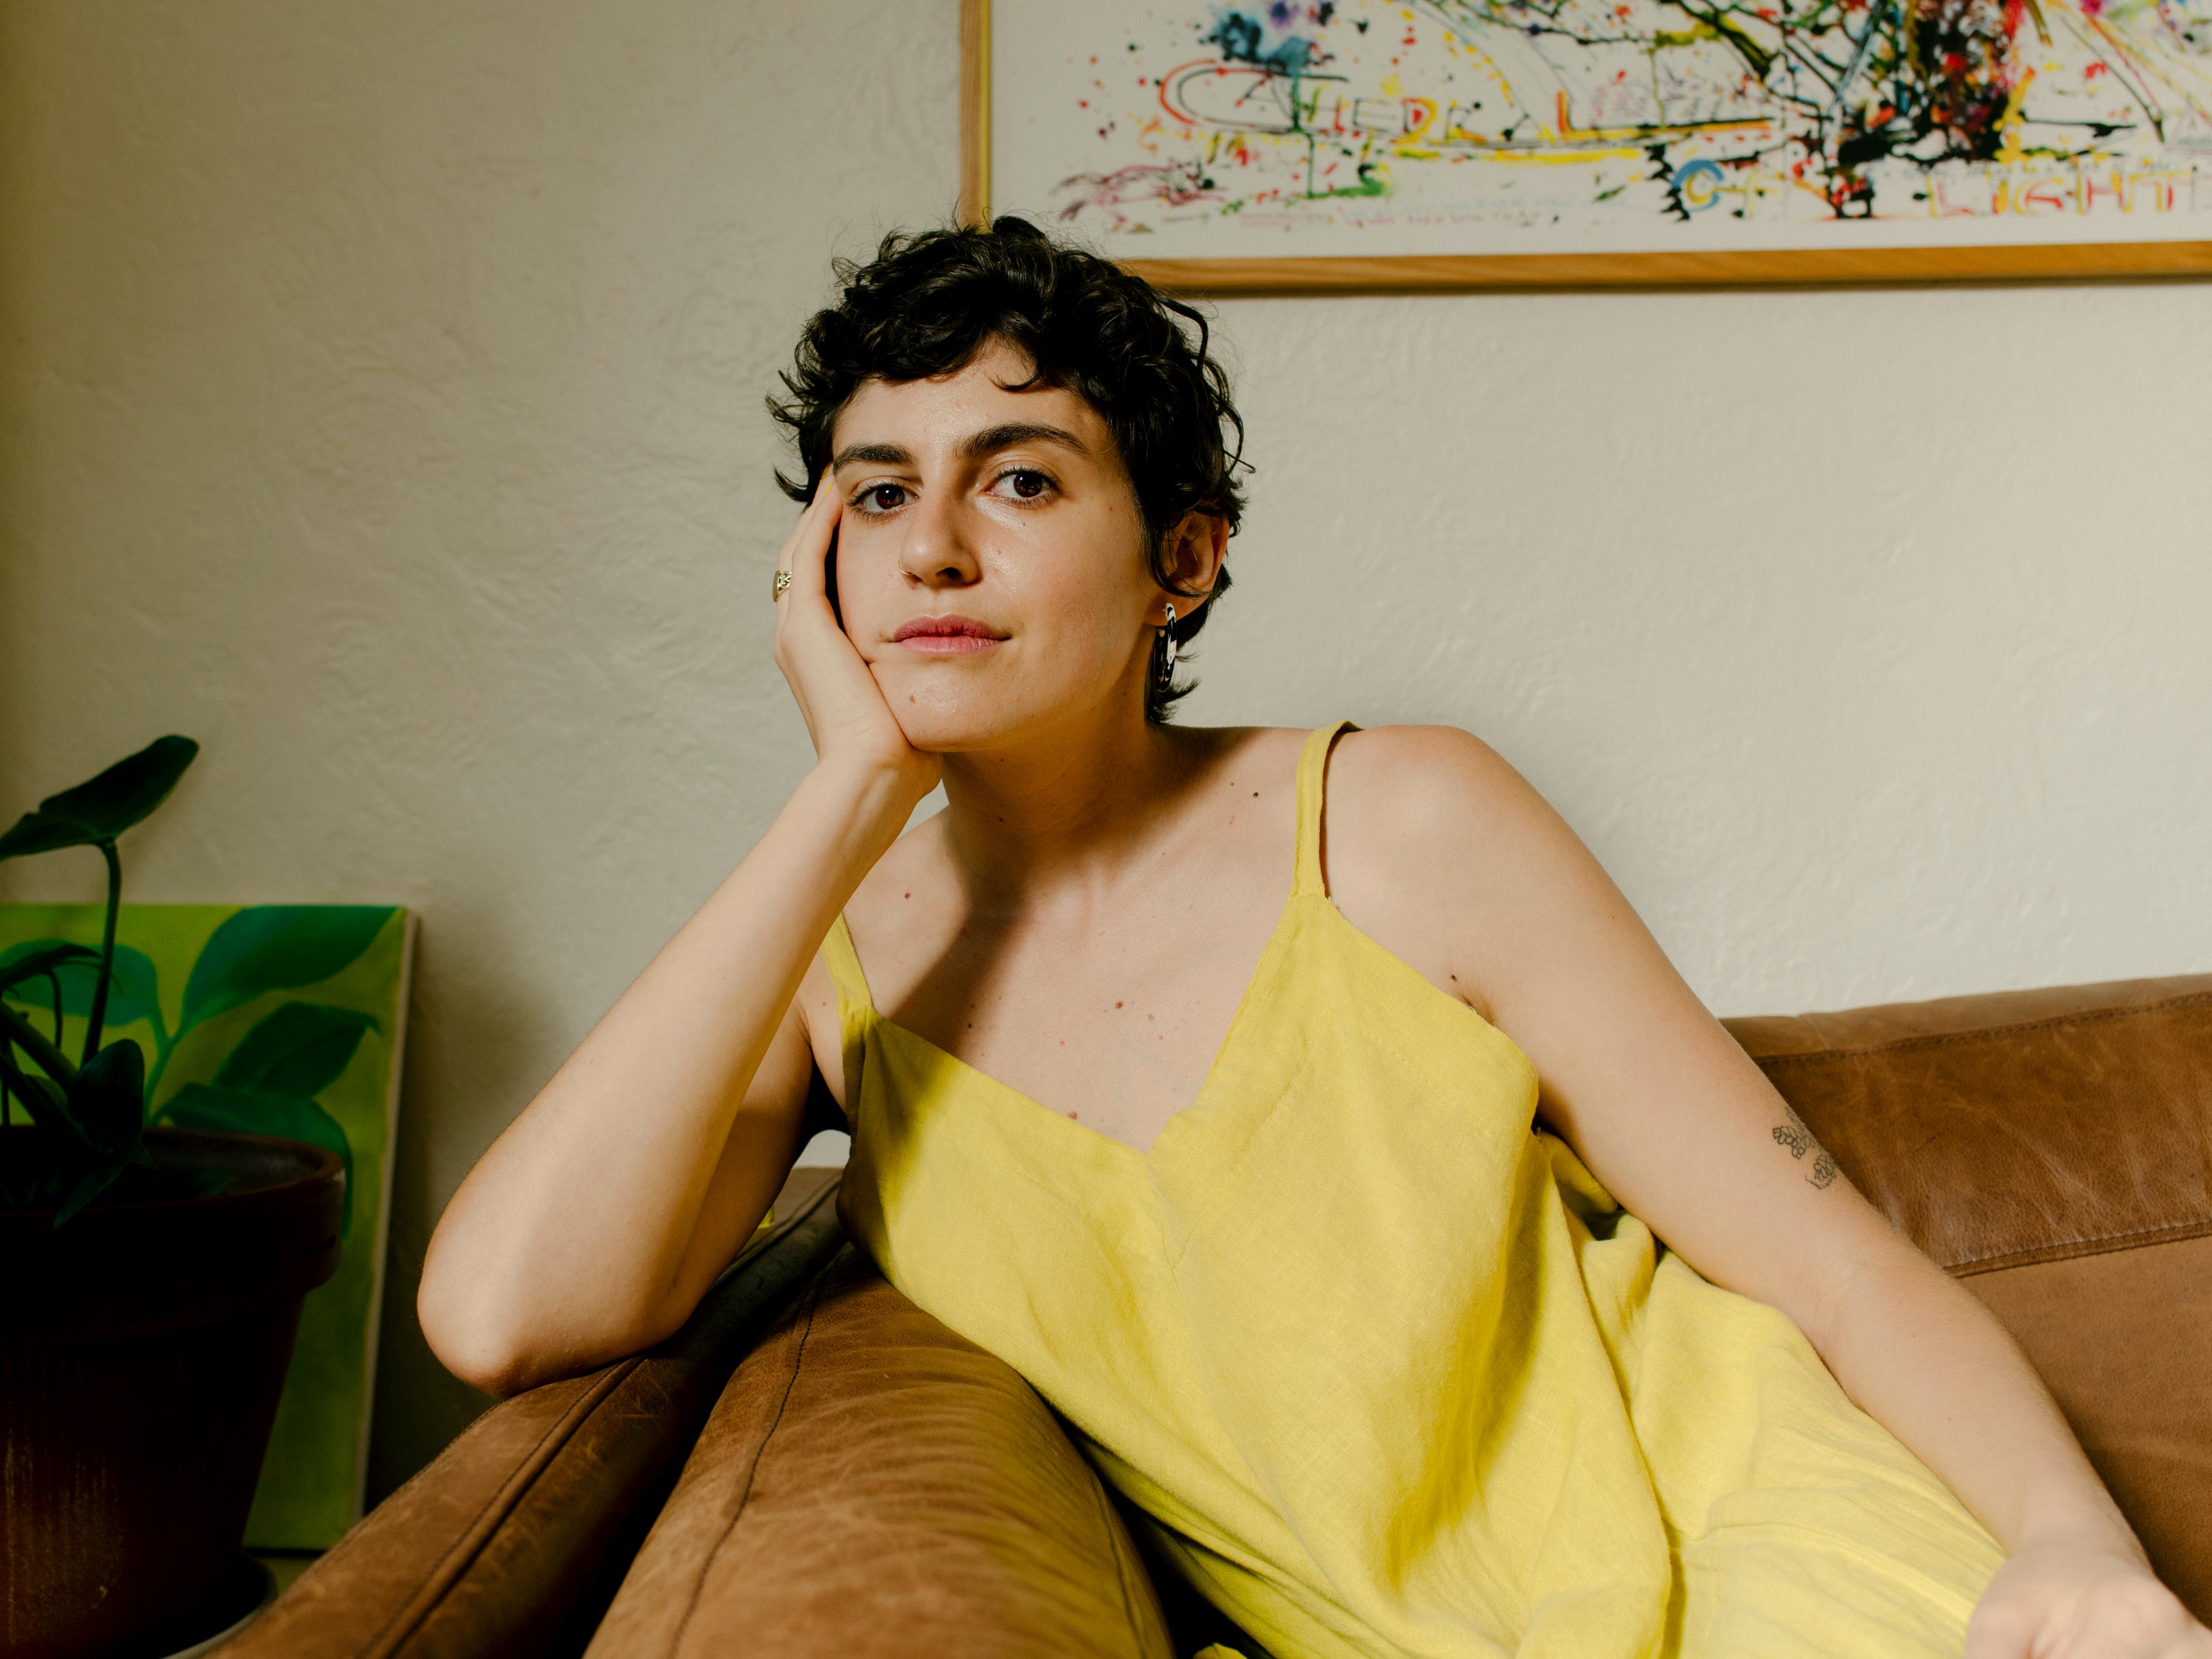 Zoe Schlanger wears a yellow dress and leans her head on her hand while sitting on a leather sofa next to a houseplant.